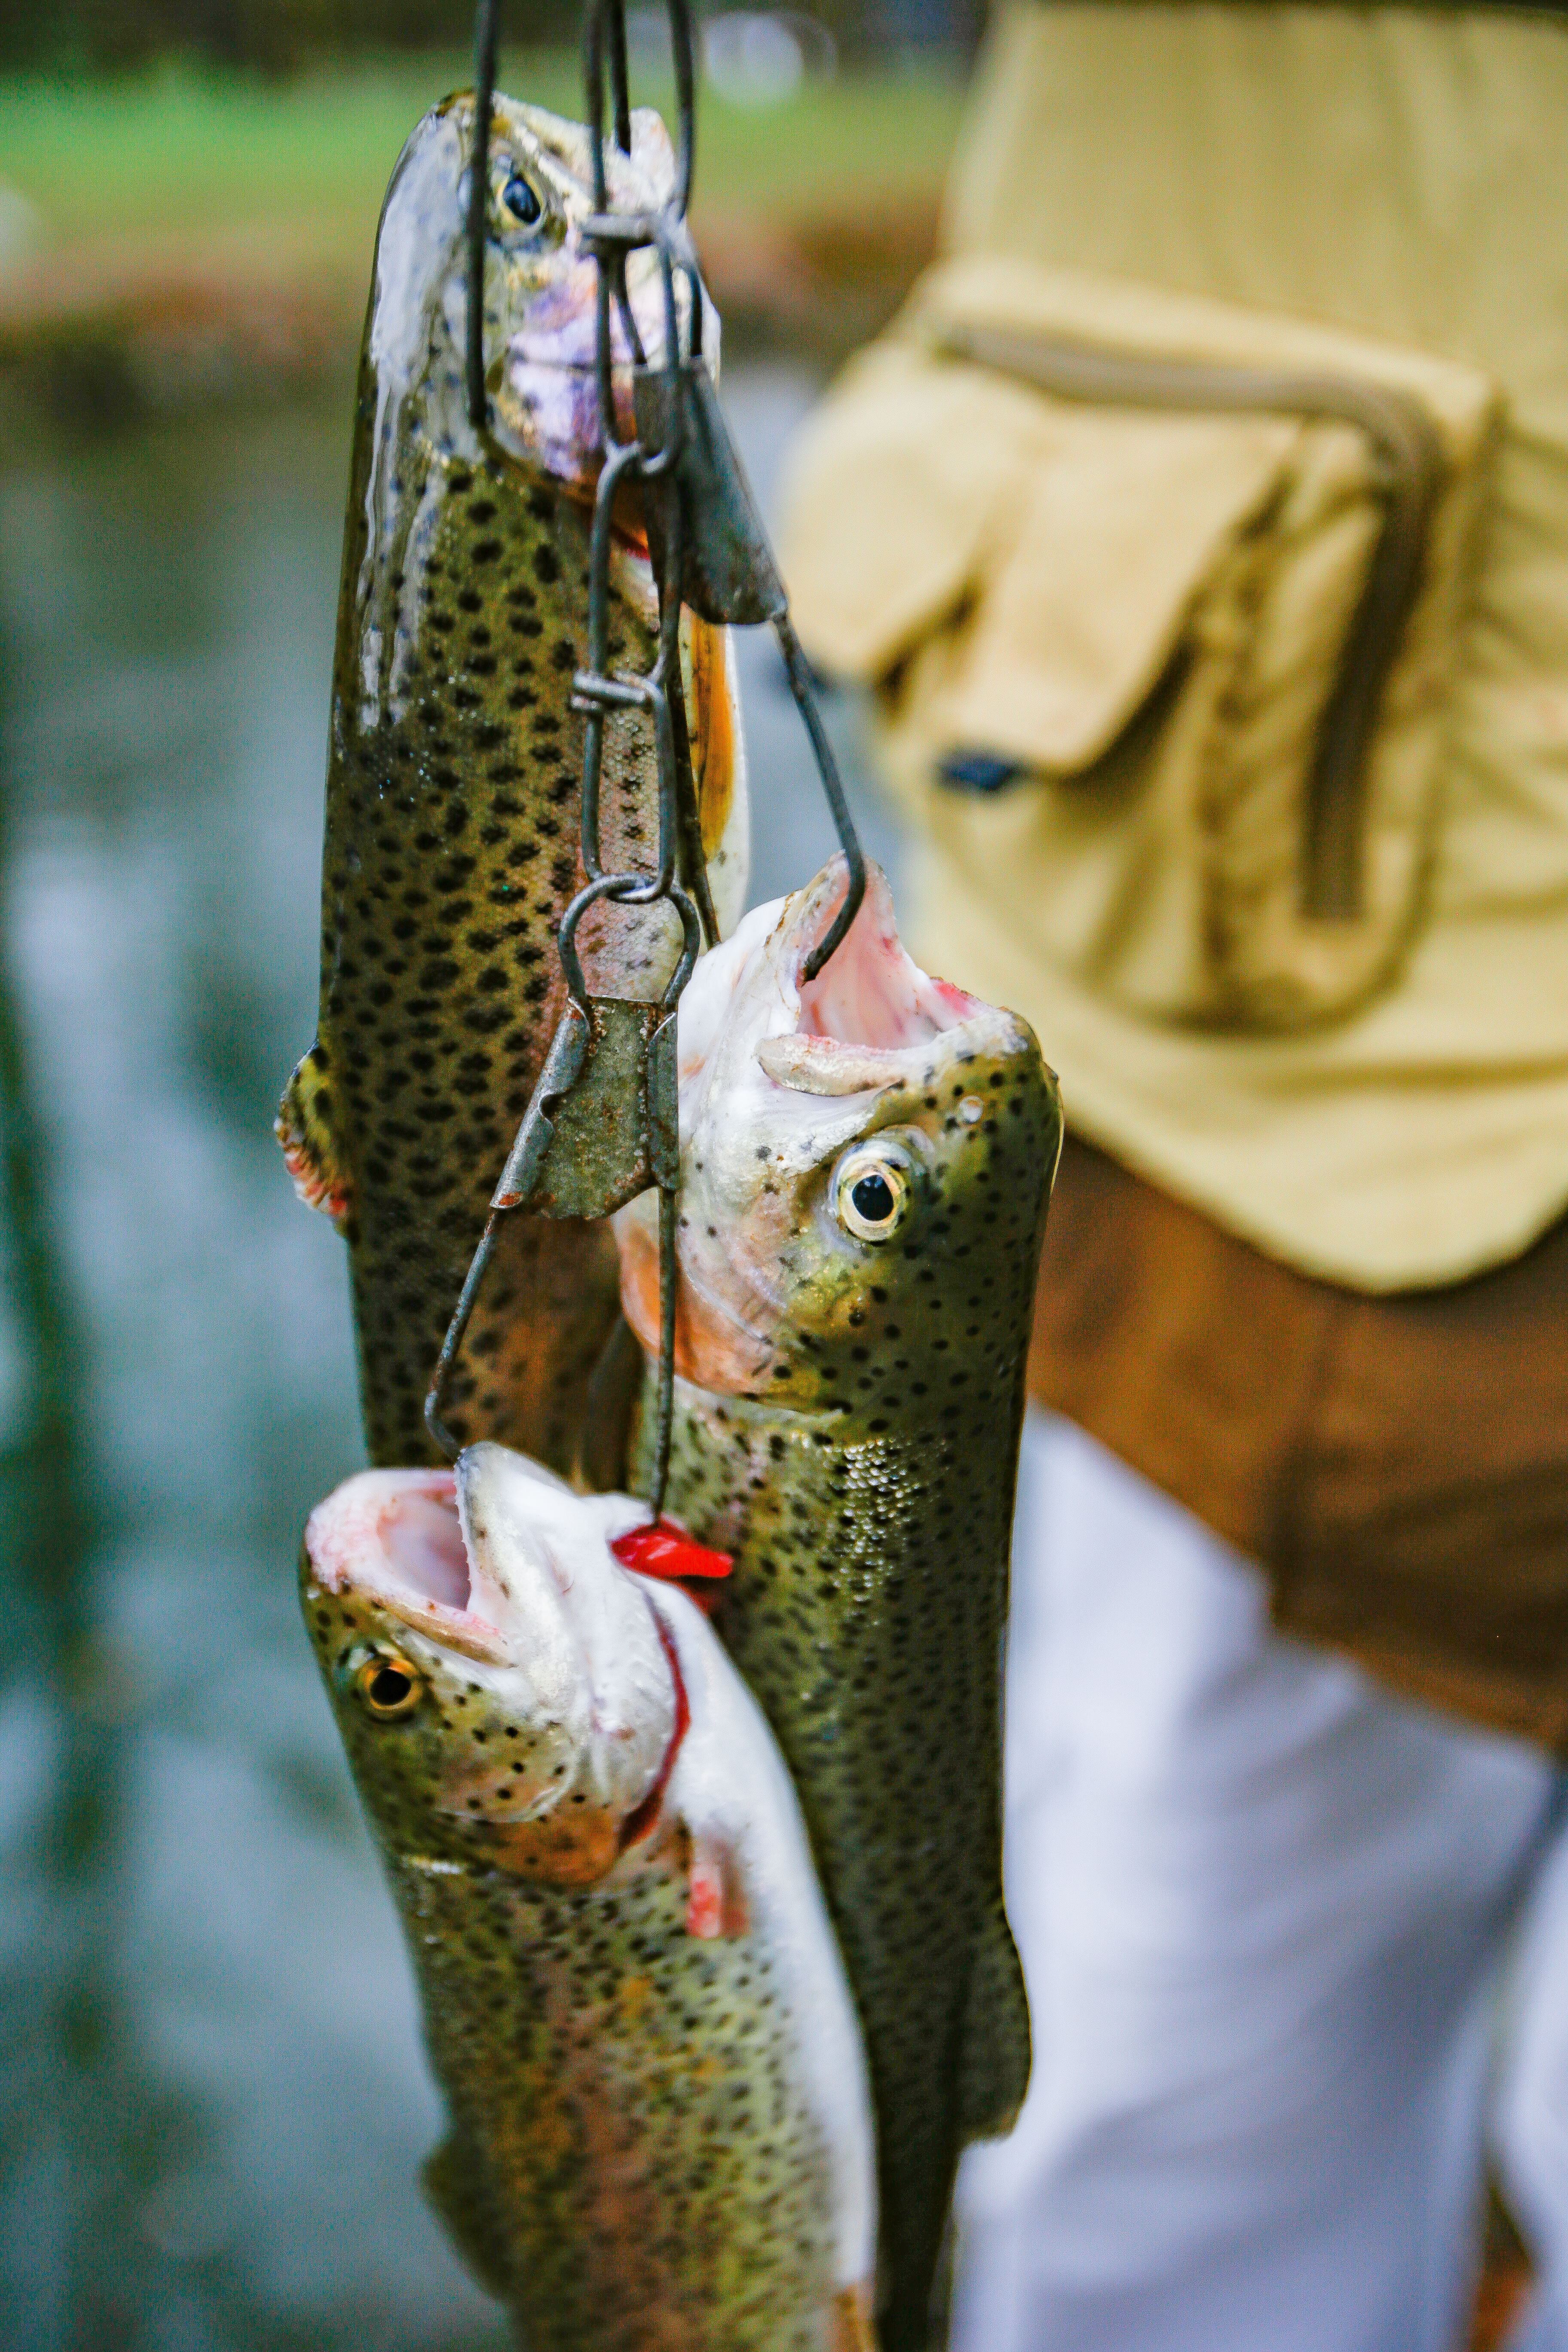 Trout fishing primer: How to get started catching 'em in the